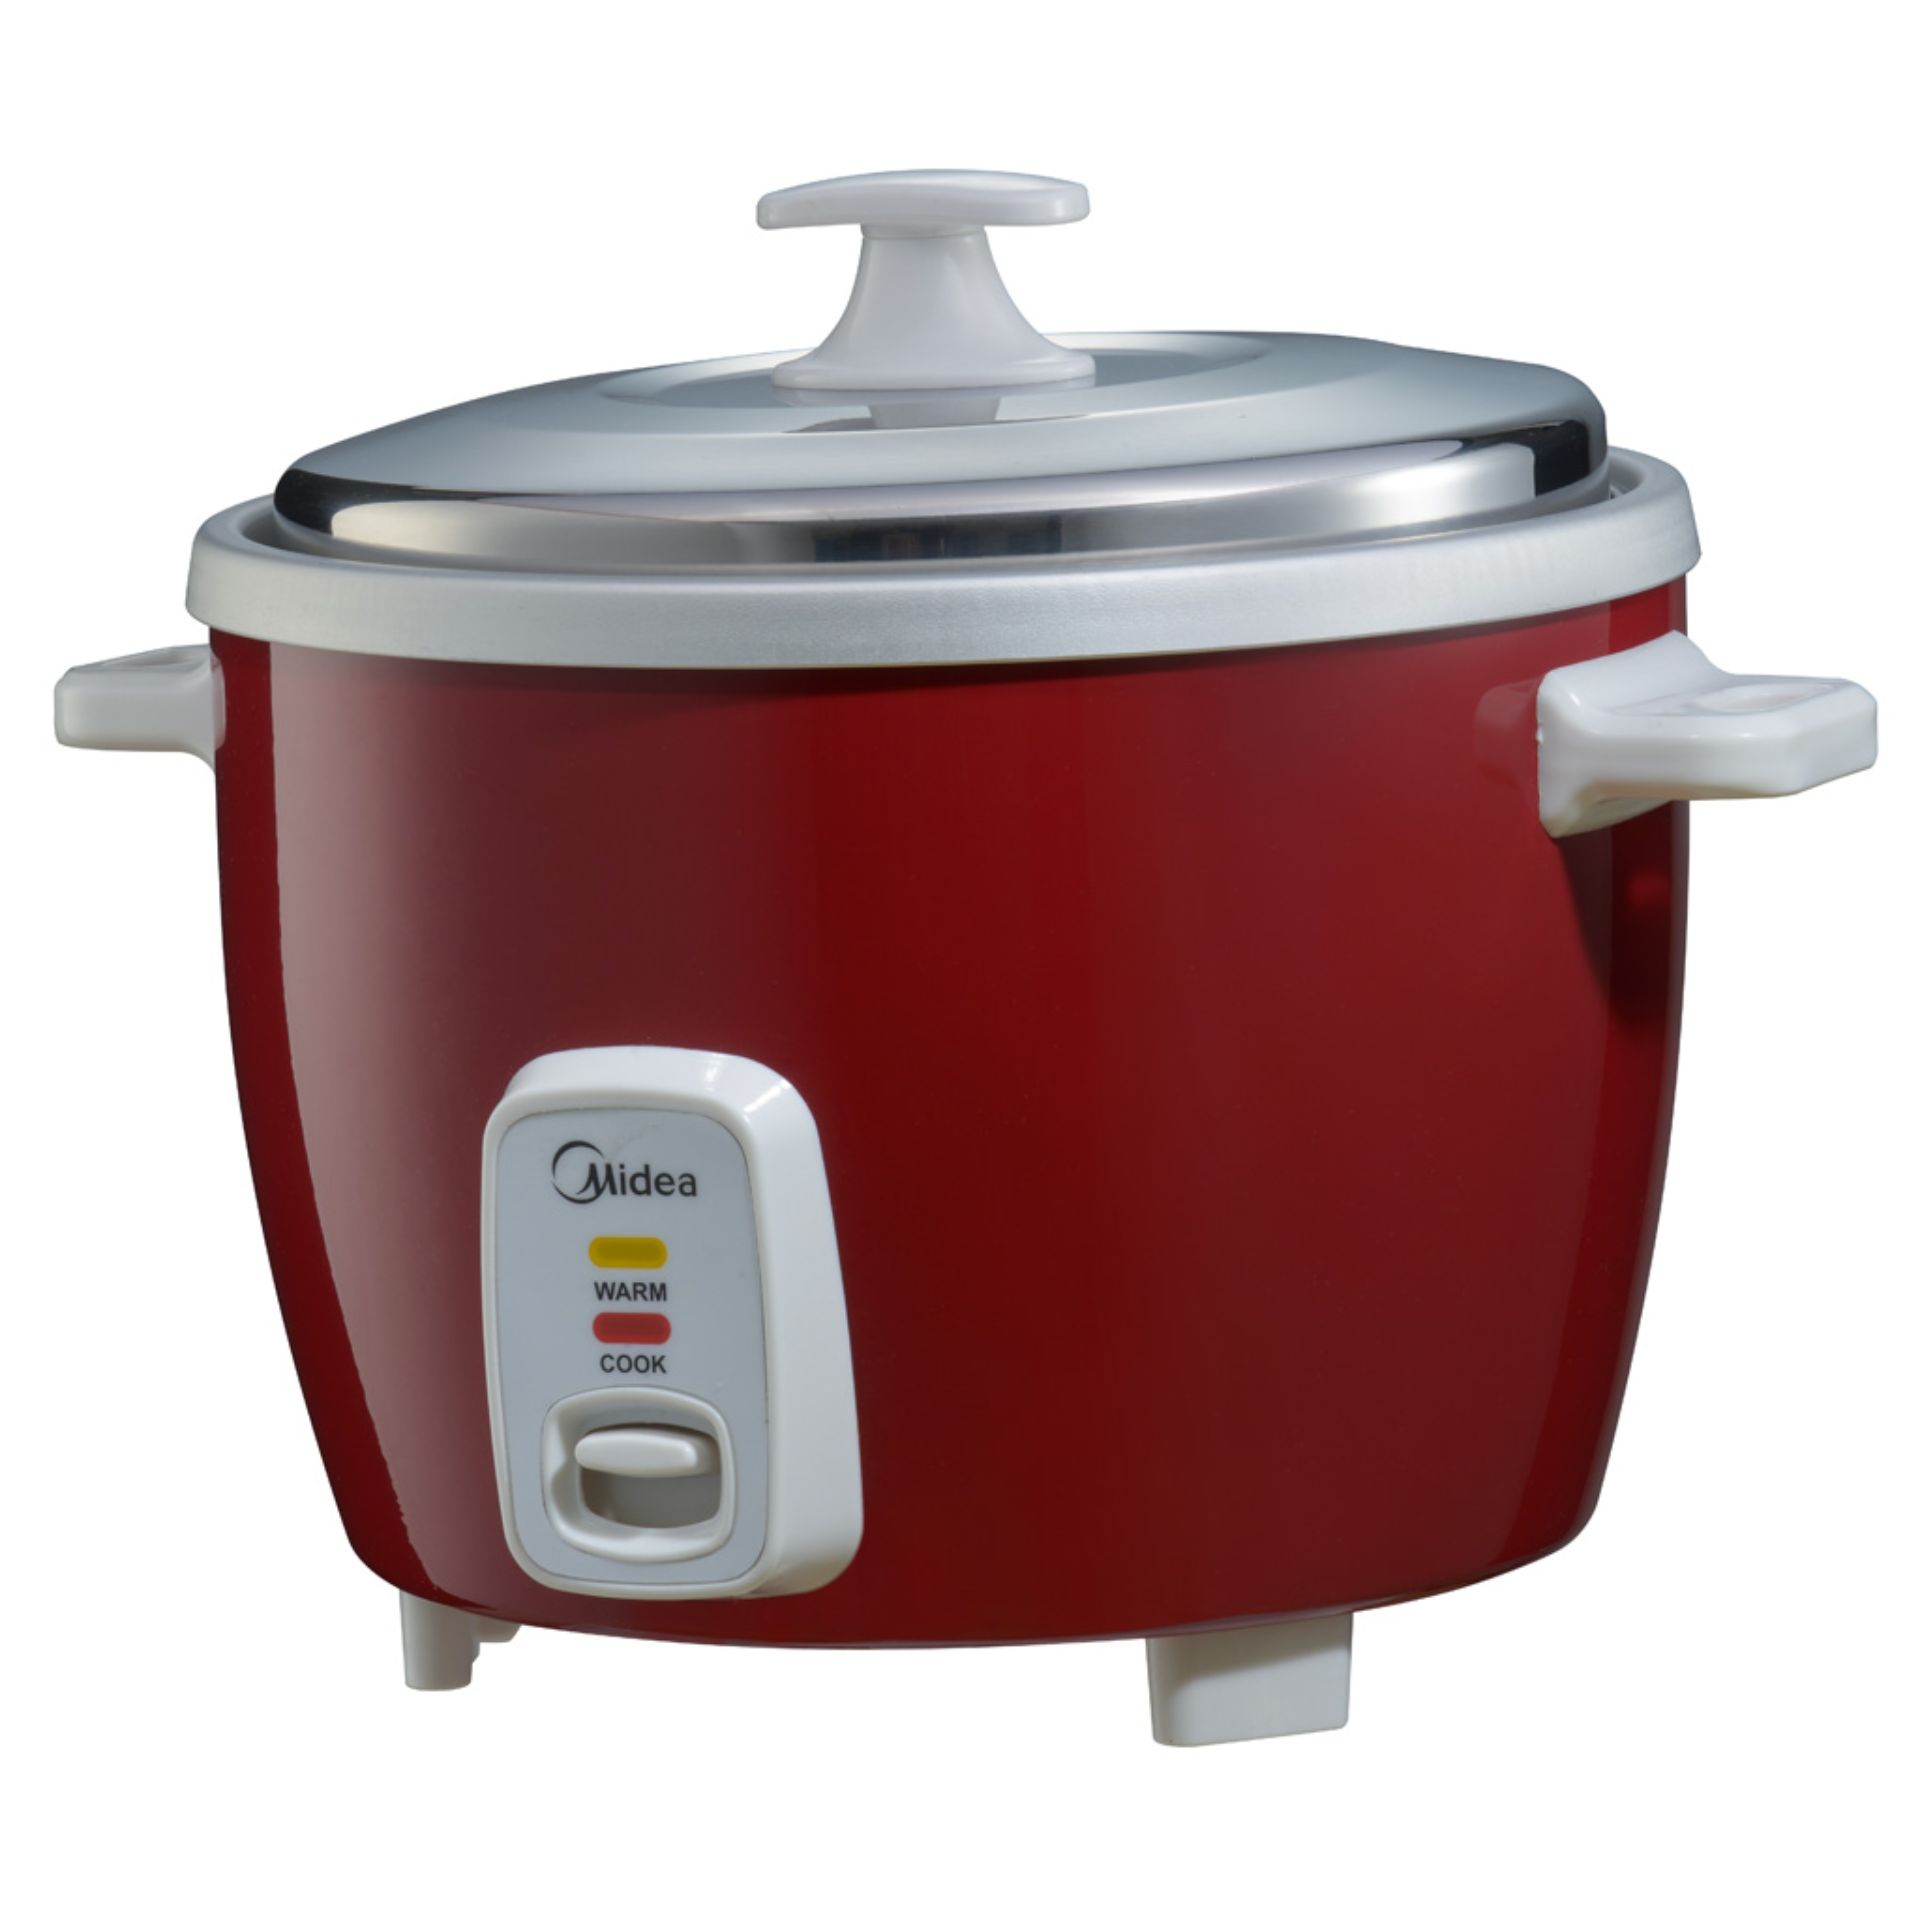 https://www.midea.com/content/dam/midea-aem/my/kitchen-appliances/cookers/rice-cookers/1-8l-conventional-rice-cooker-mr-gm18sda-r/gallery3.jpg